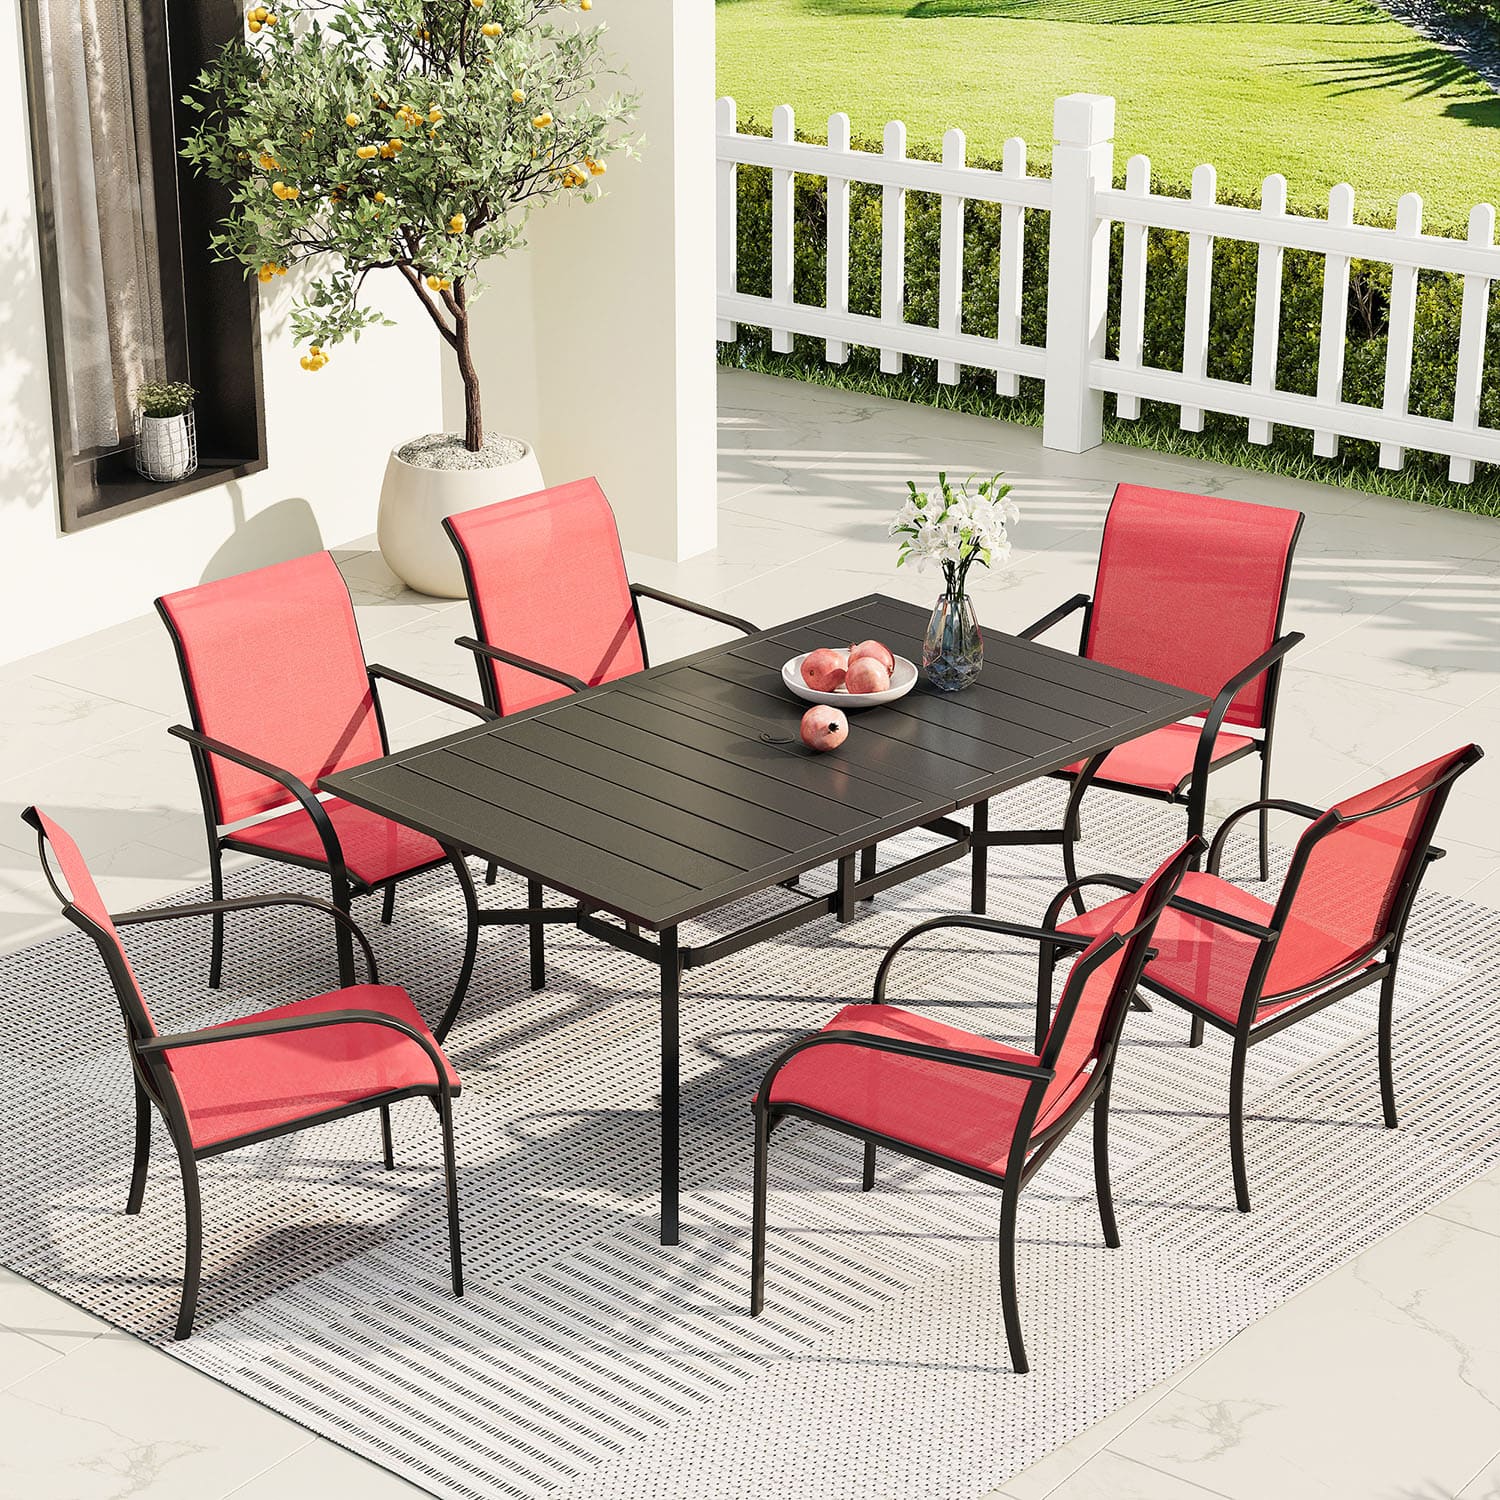 Vicllax 7 Pieces Outdoor Dining Set with Curved Dining Table and Stackable Sling Chair